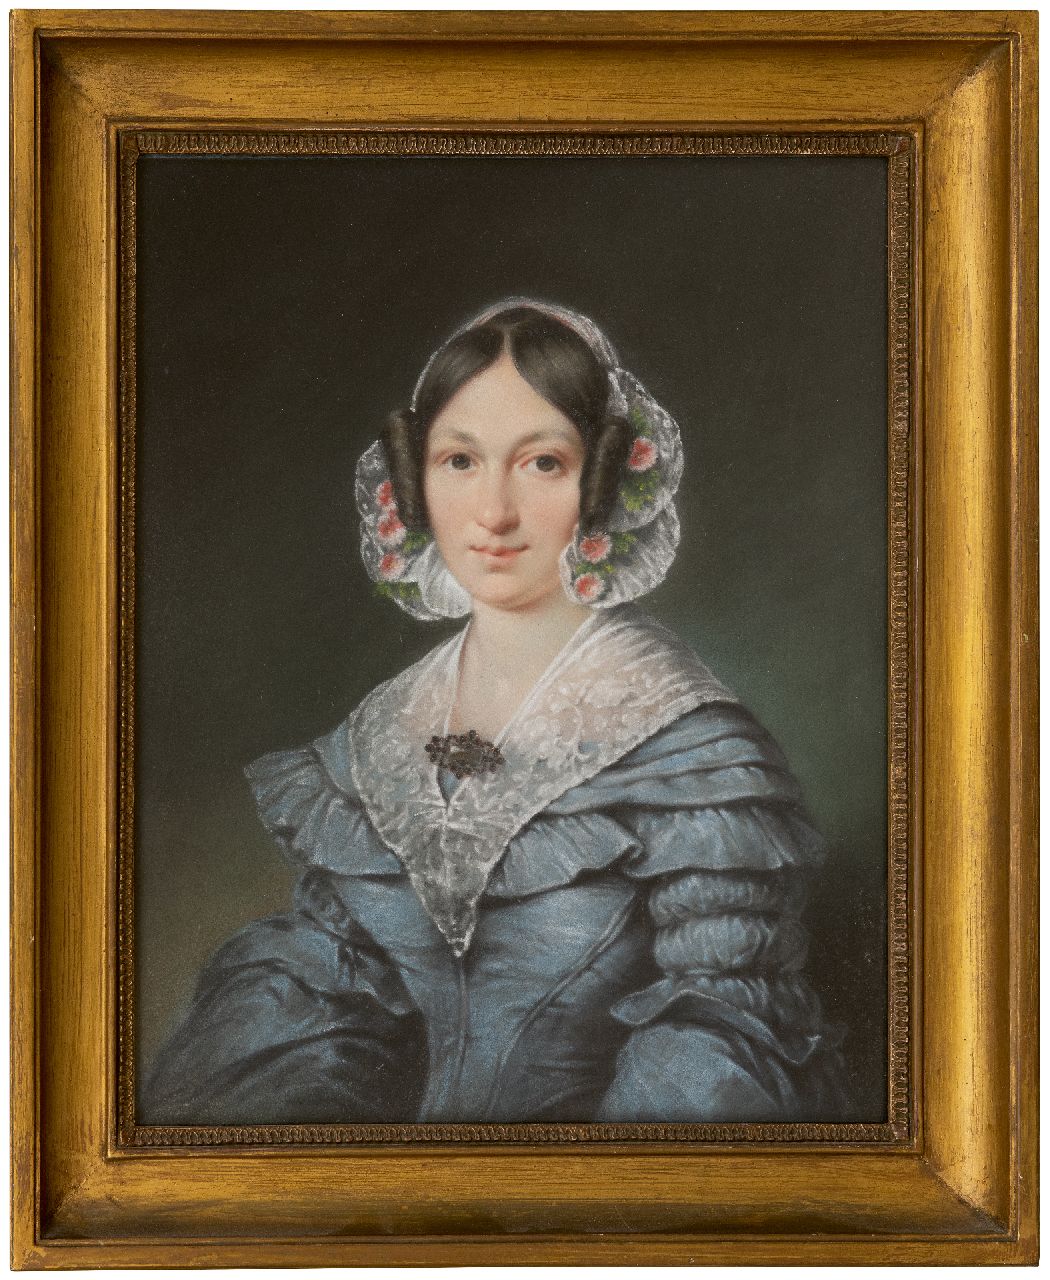 Daiwaille J.A.  | Jean Augustin Daiwaille | Watercolours and drawings offered for sale | Portrait of a woman, presumably Maria Louisa Engelman-Hakbijl (1 from 4 portraits), pastel on paper 30.5